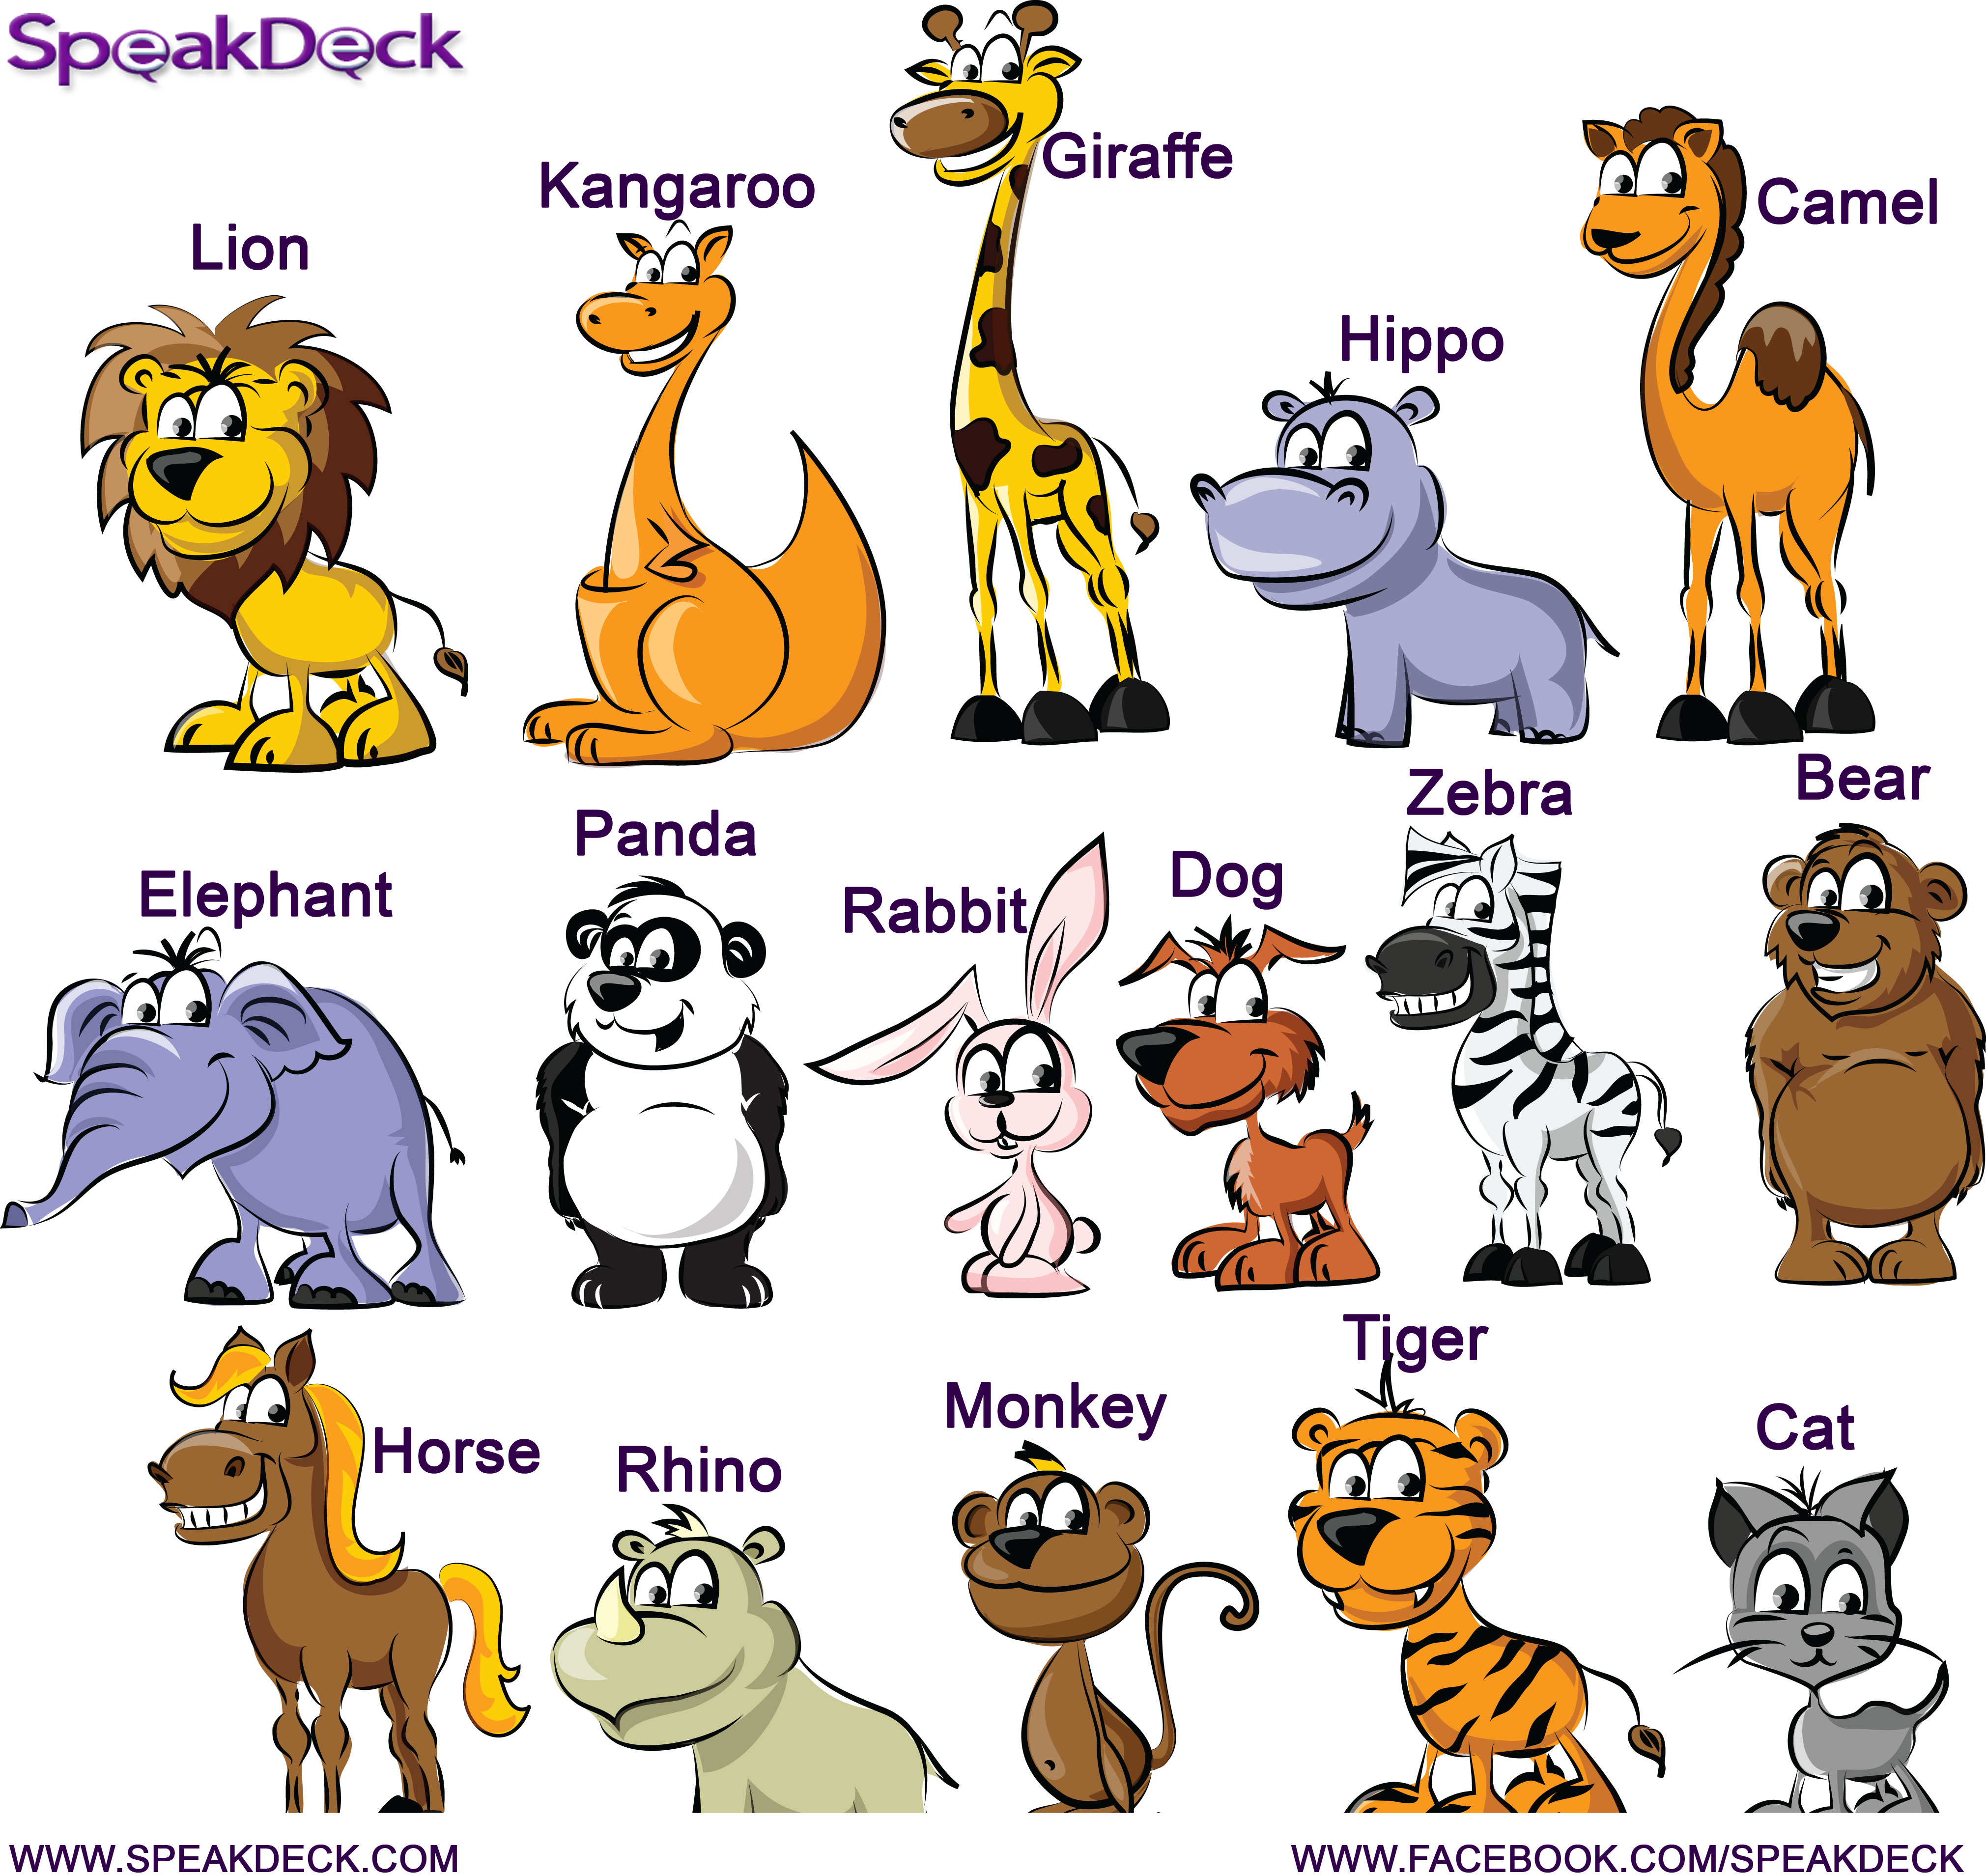 zoo-animals-with-names